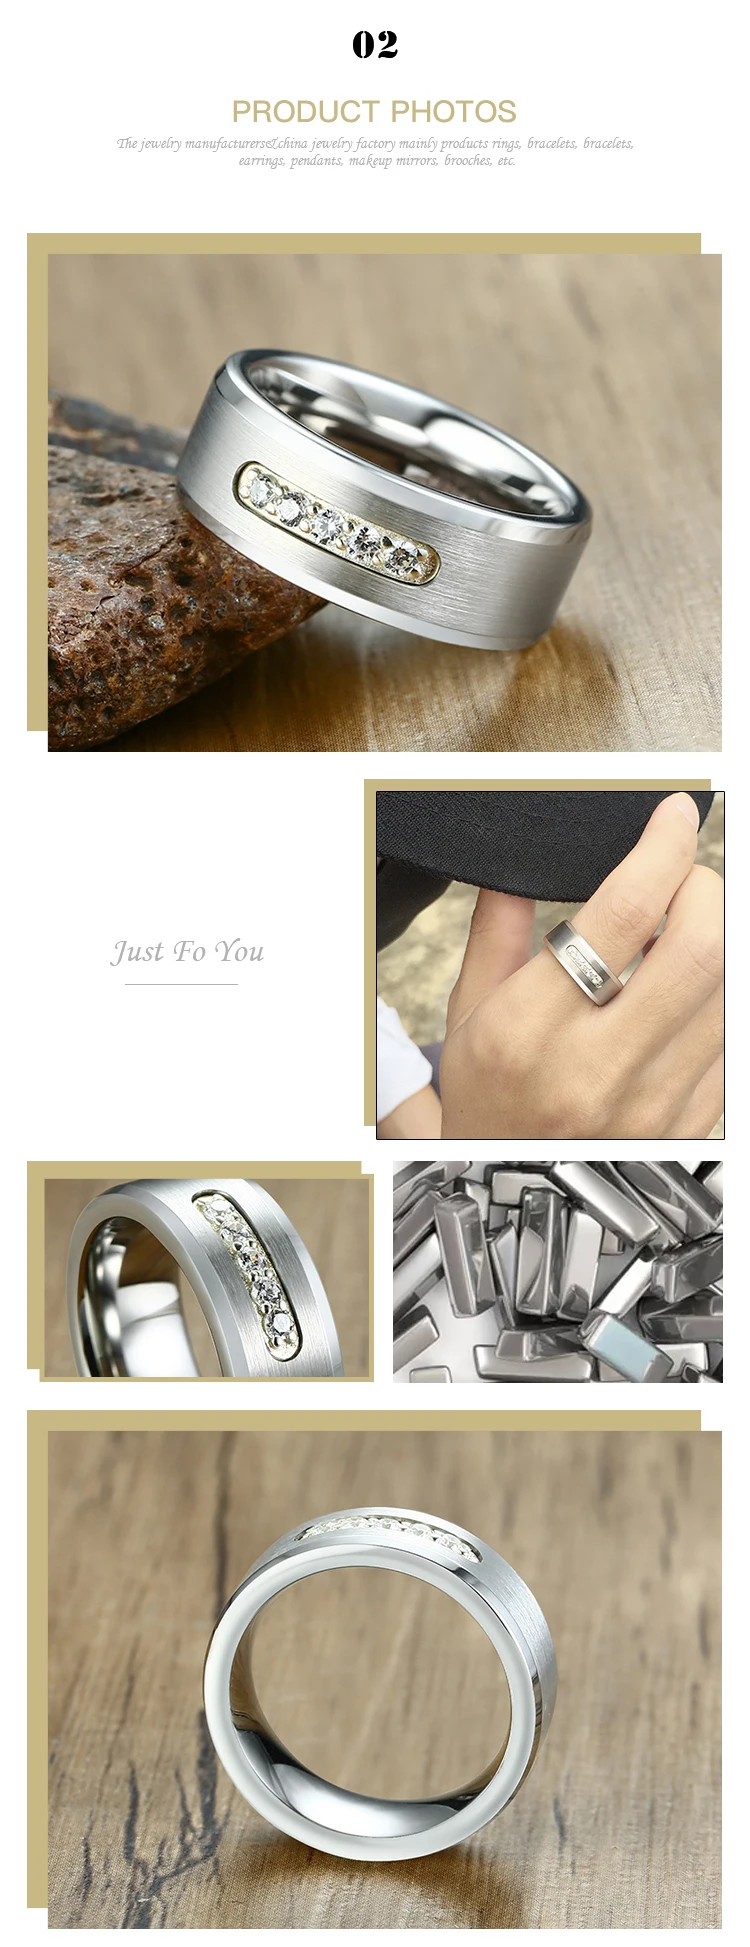 Supplier Wholesale European and American men's tungsten steel ring with zircon joints TCR-084